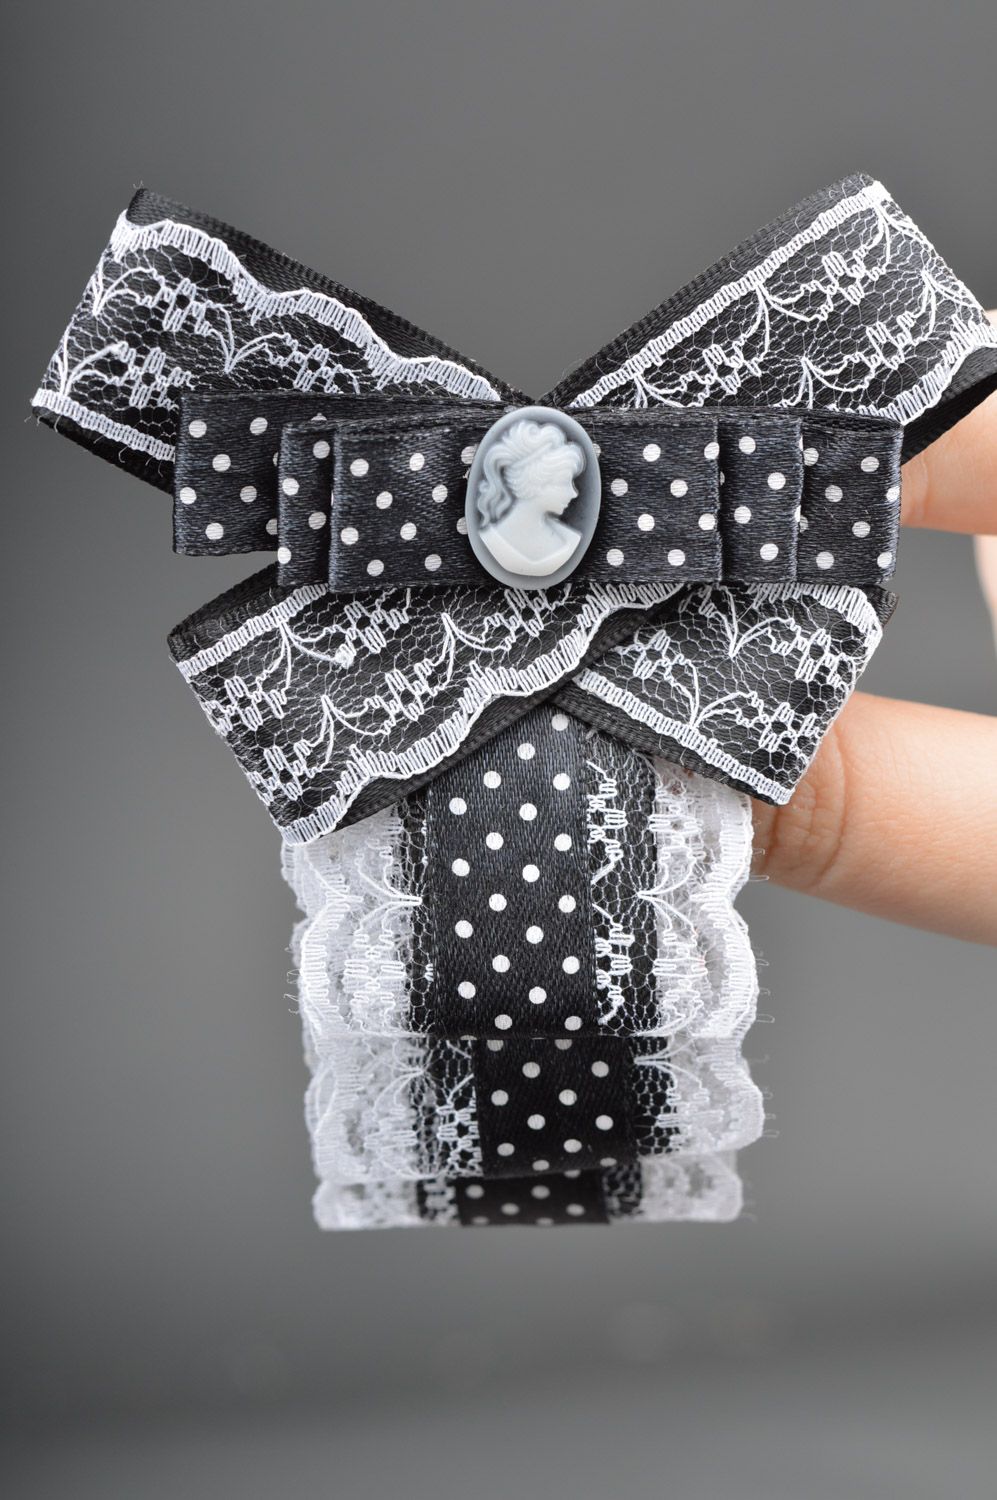 Handmade black and white polka dot fabric jabot brooch with cameo and lace photo 2